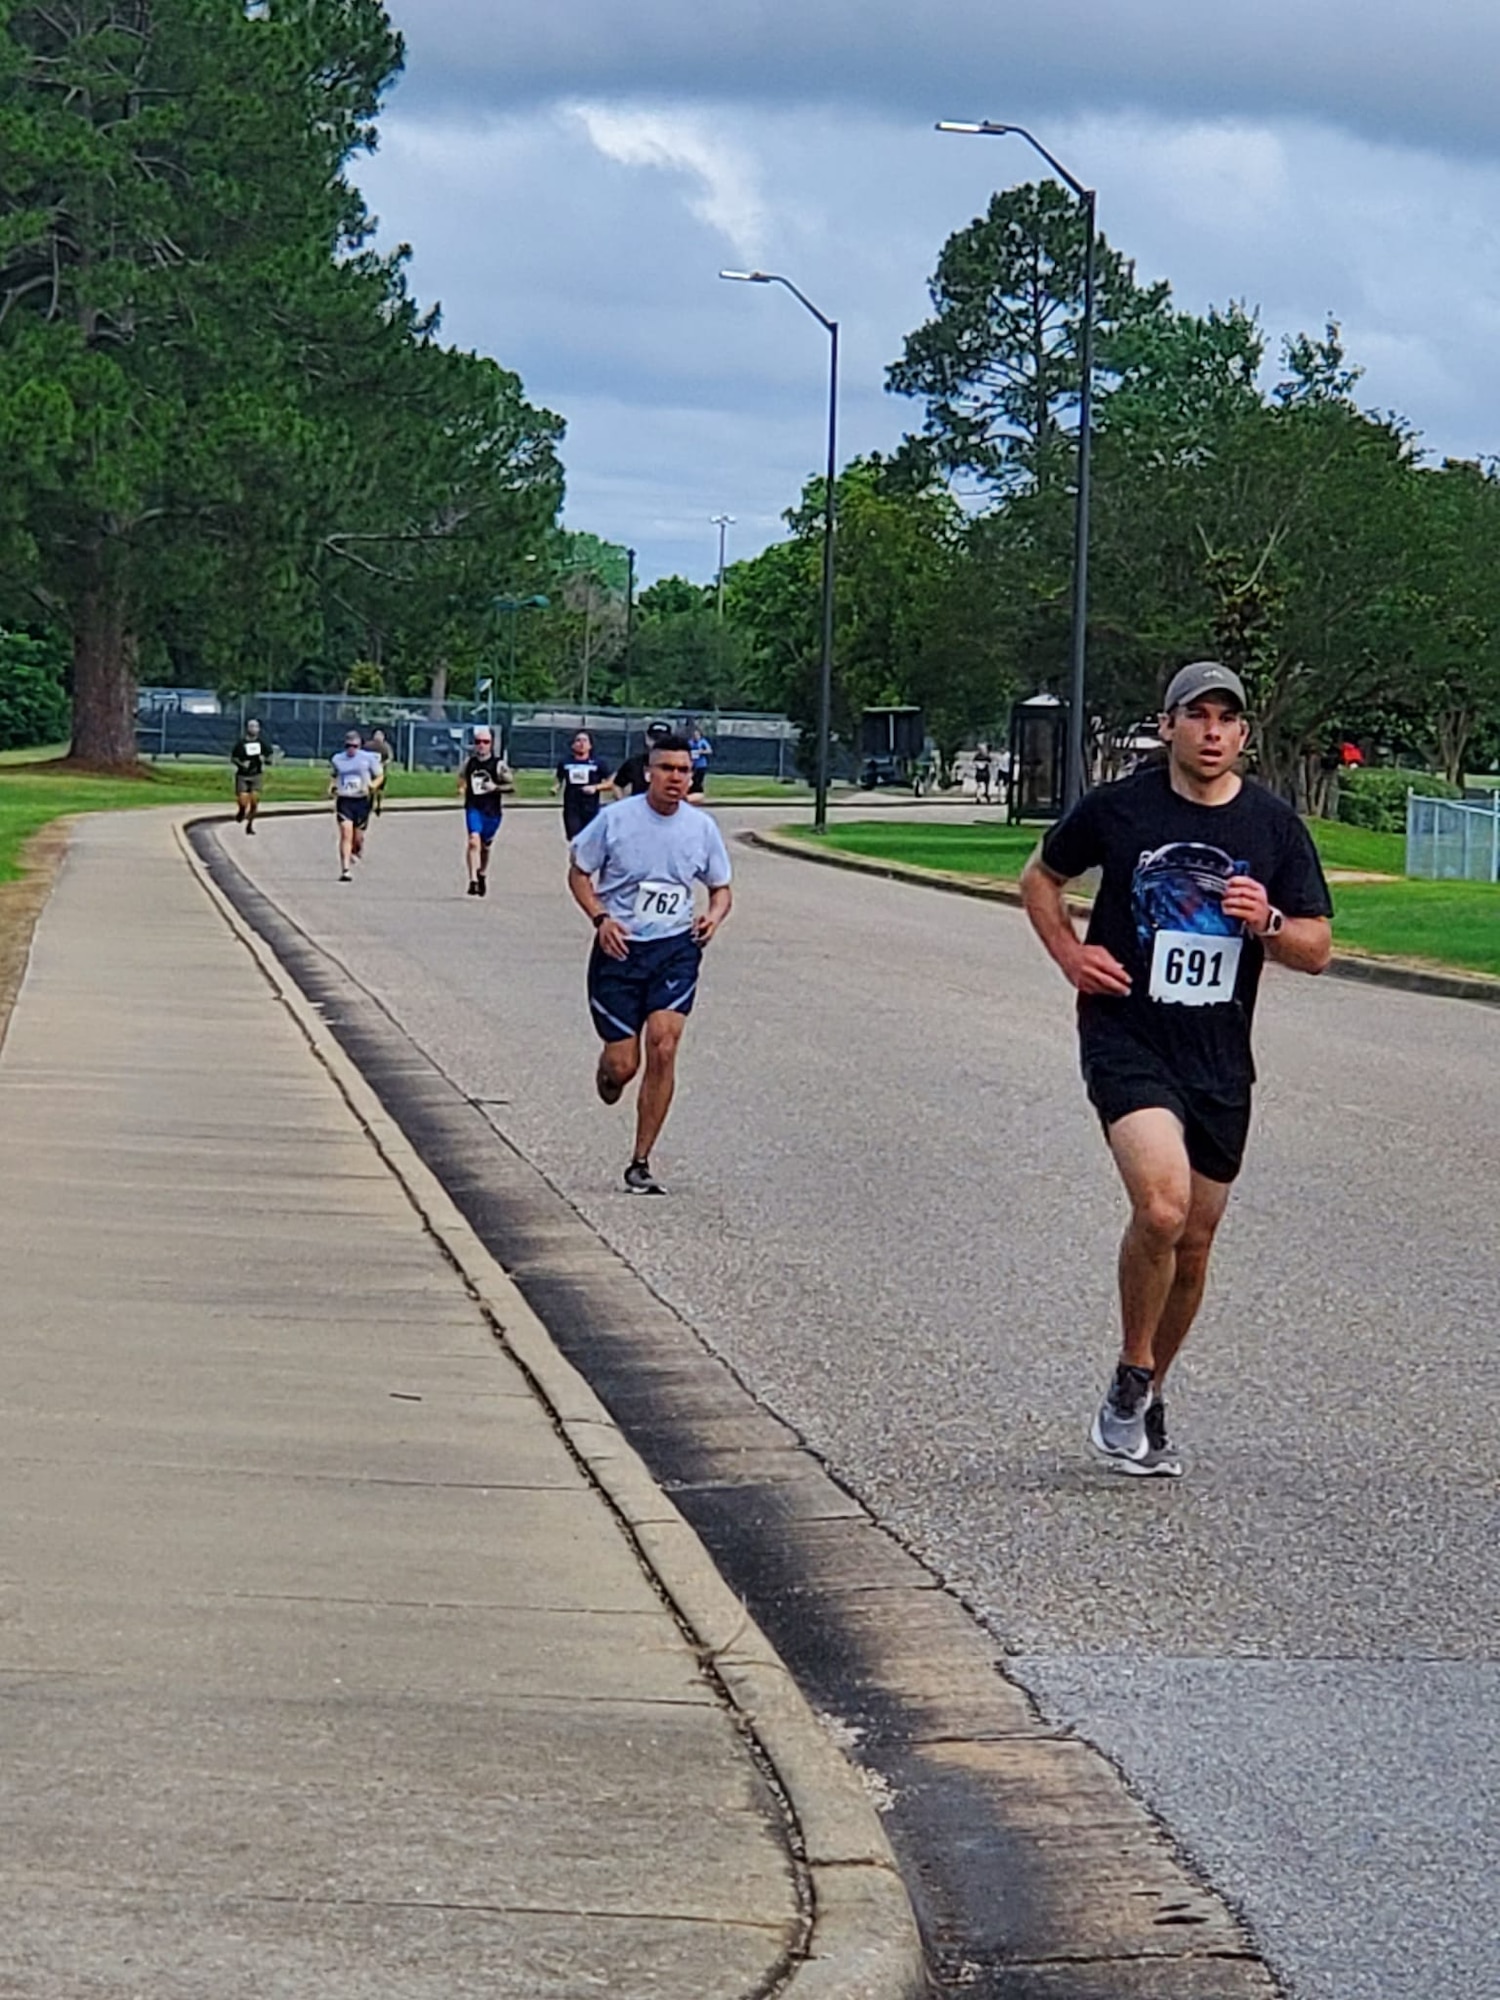 Runners participate in the SNCOA 50th Anniversary 5K run on Maxwell Air Force Base - Gunter Annex, Ala., May 21, 2023. (Courtesy photo)